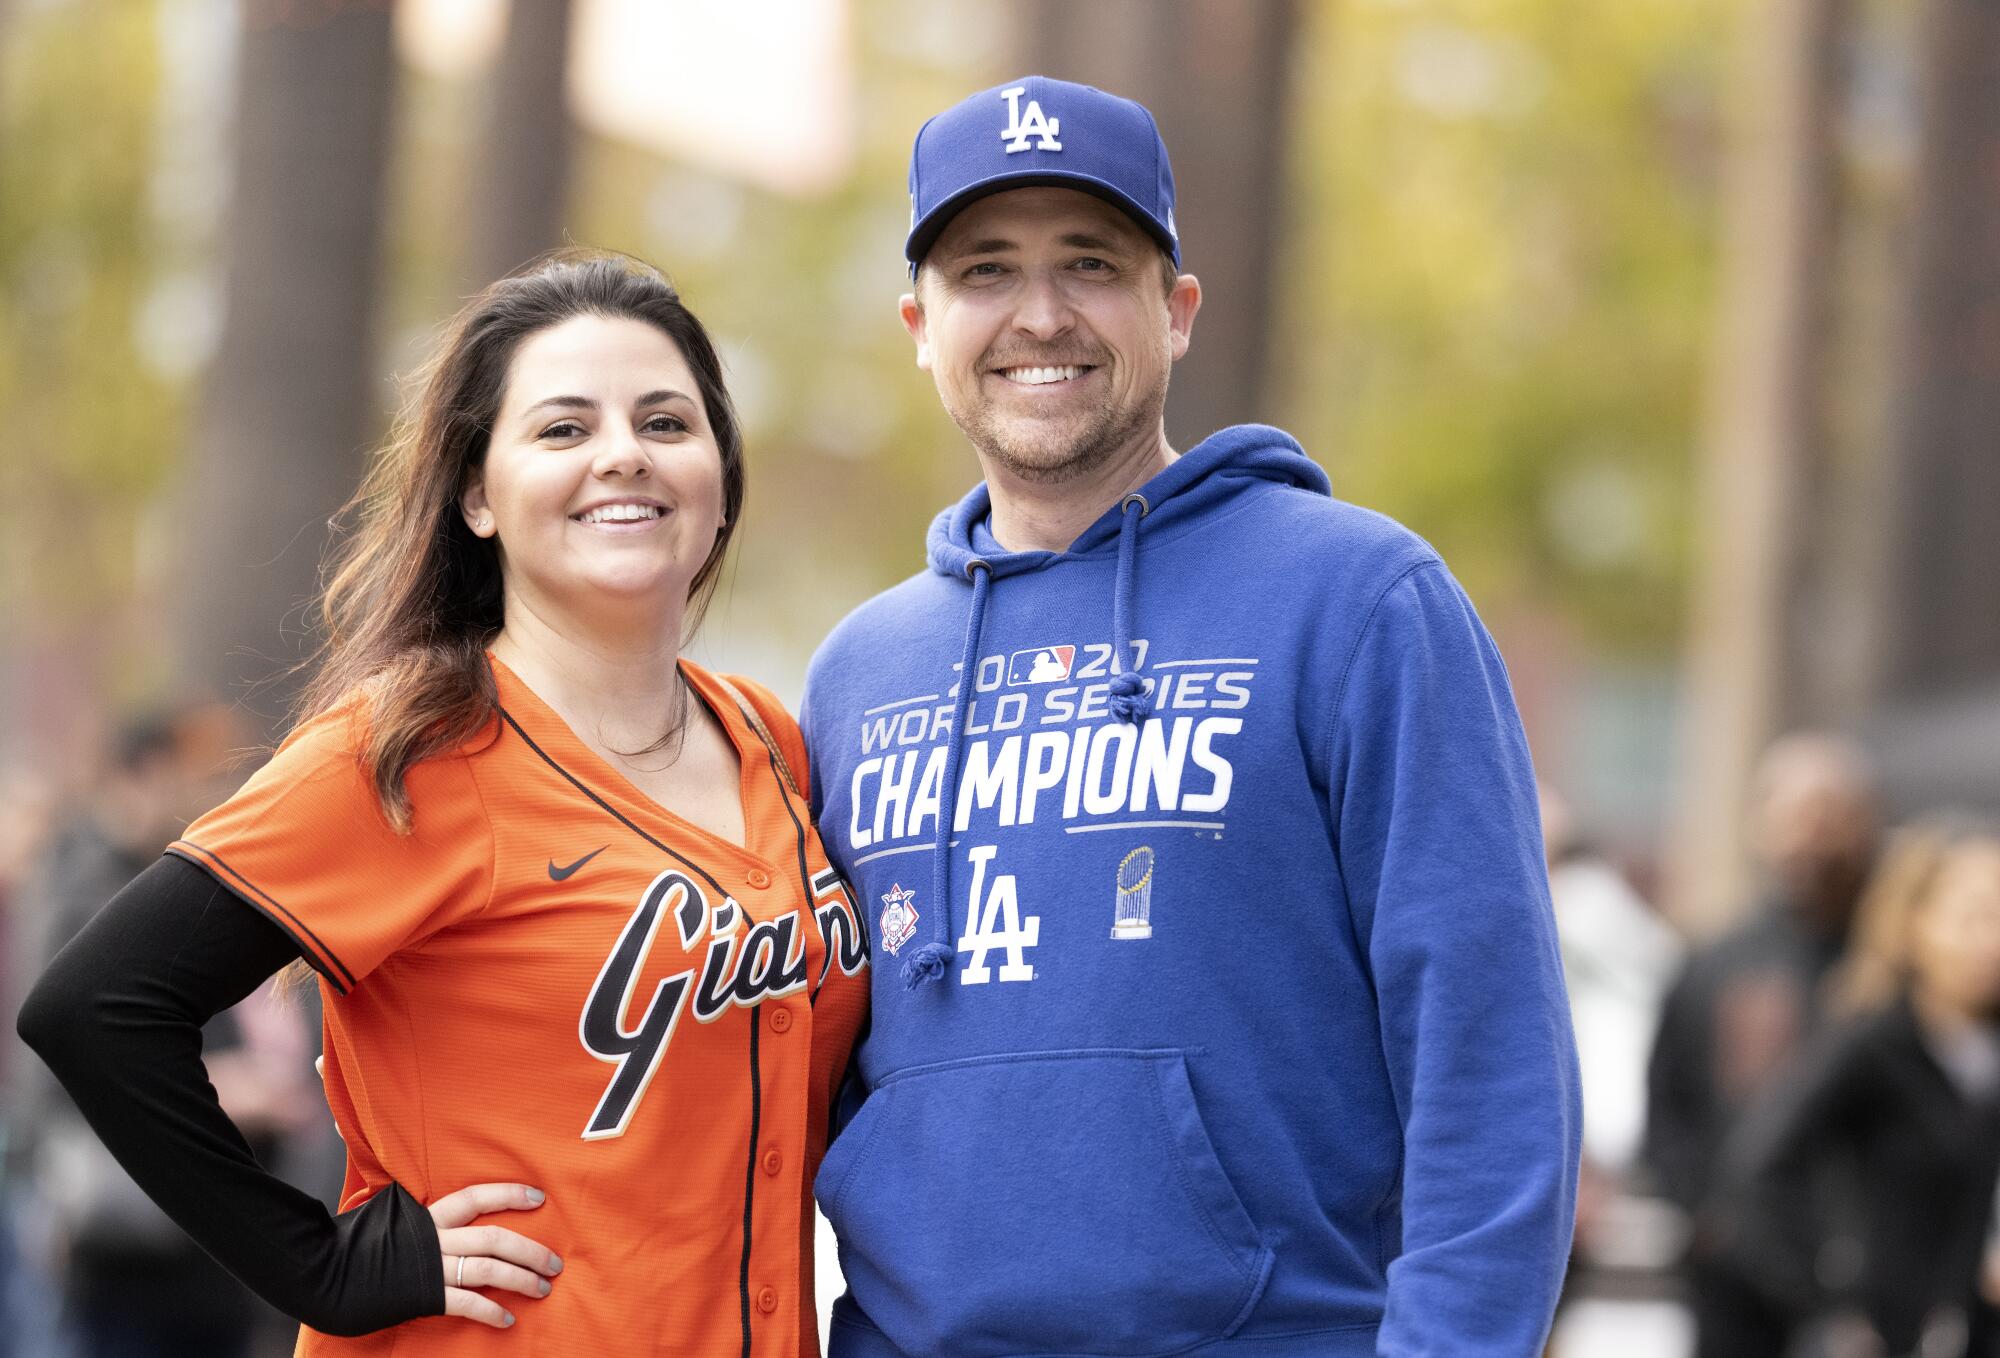 NLDS: Dodgers and Giants fans sound off on the rivalry - Los Angeles Times